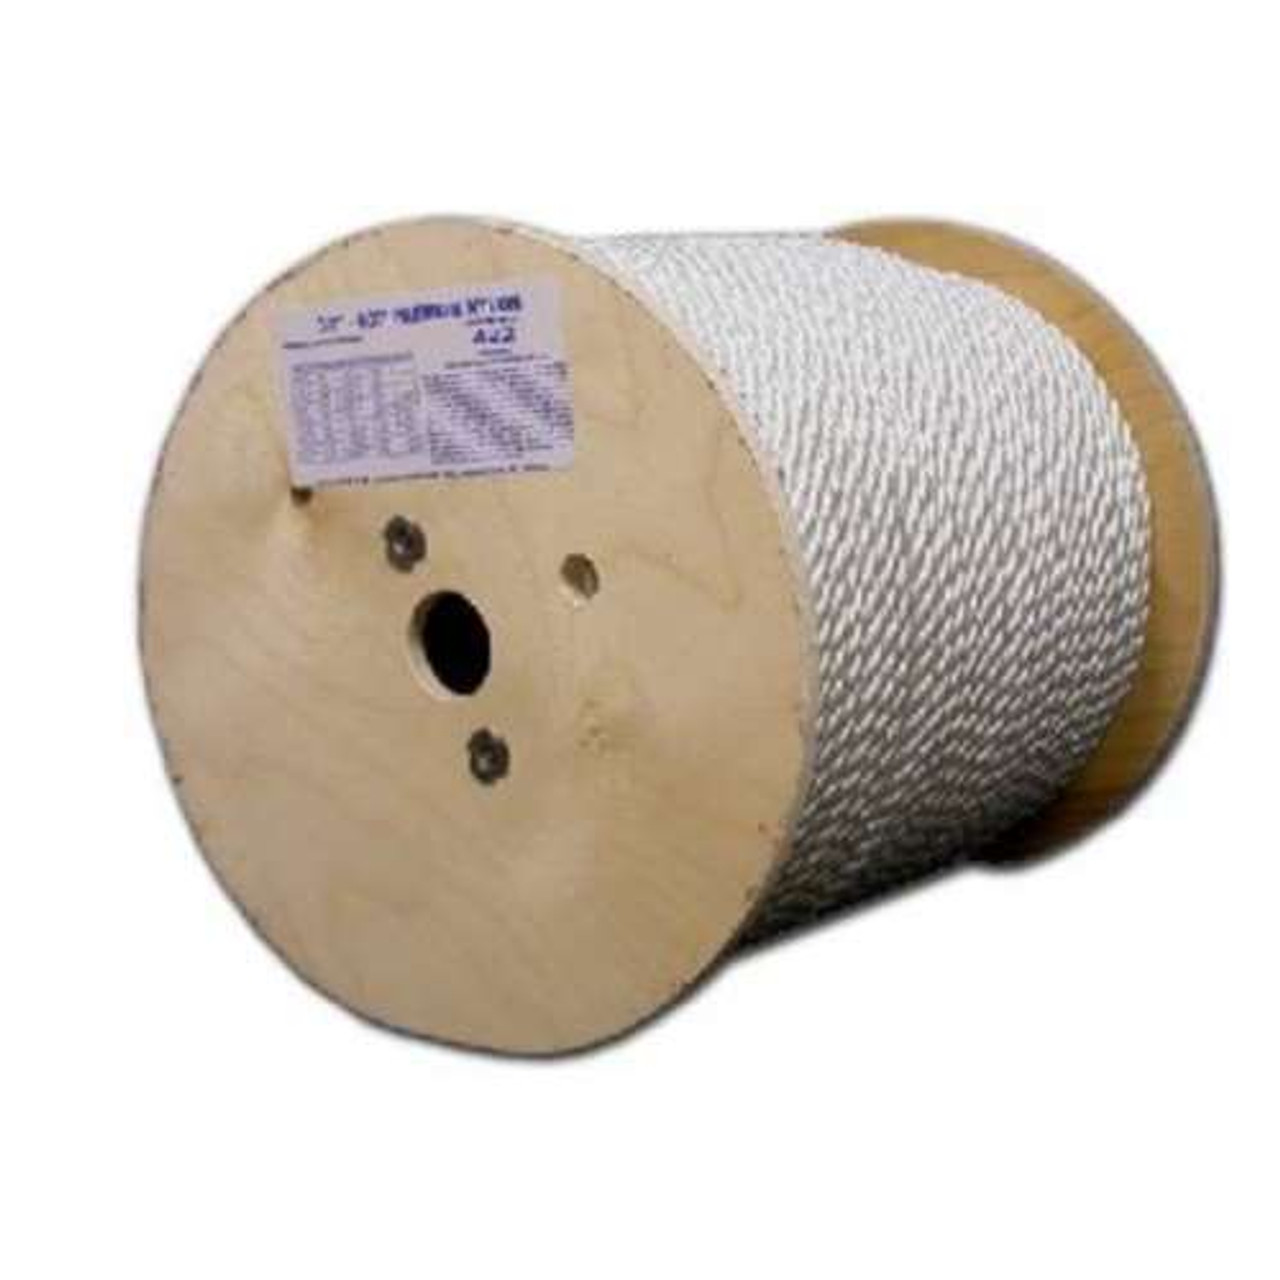 1/4 X 600' WHITE NYLON ROPE SPOOLED - 1490 LBS BREAK - Bairstow Lifting  Products